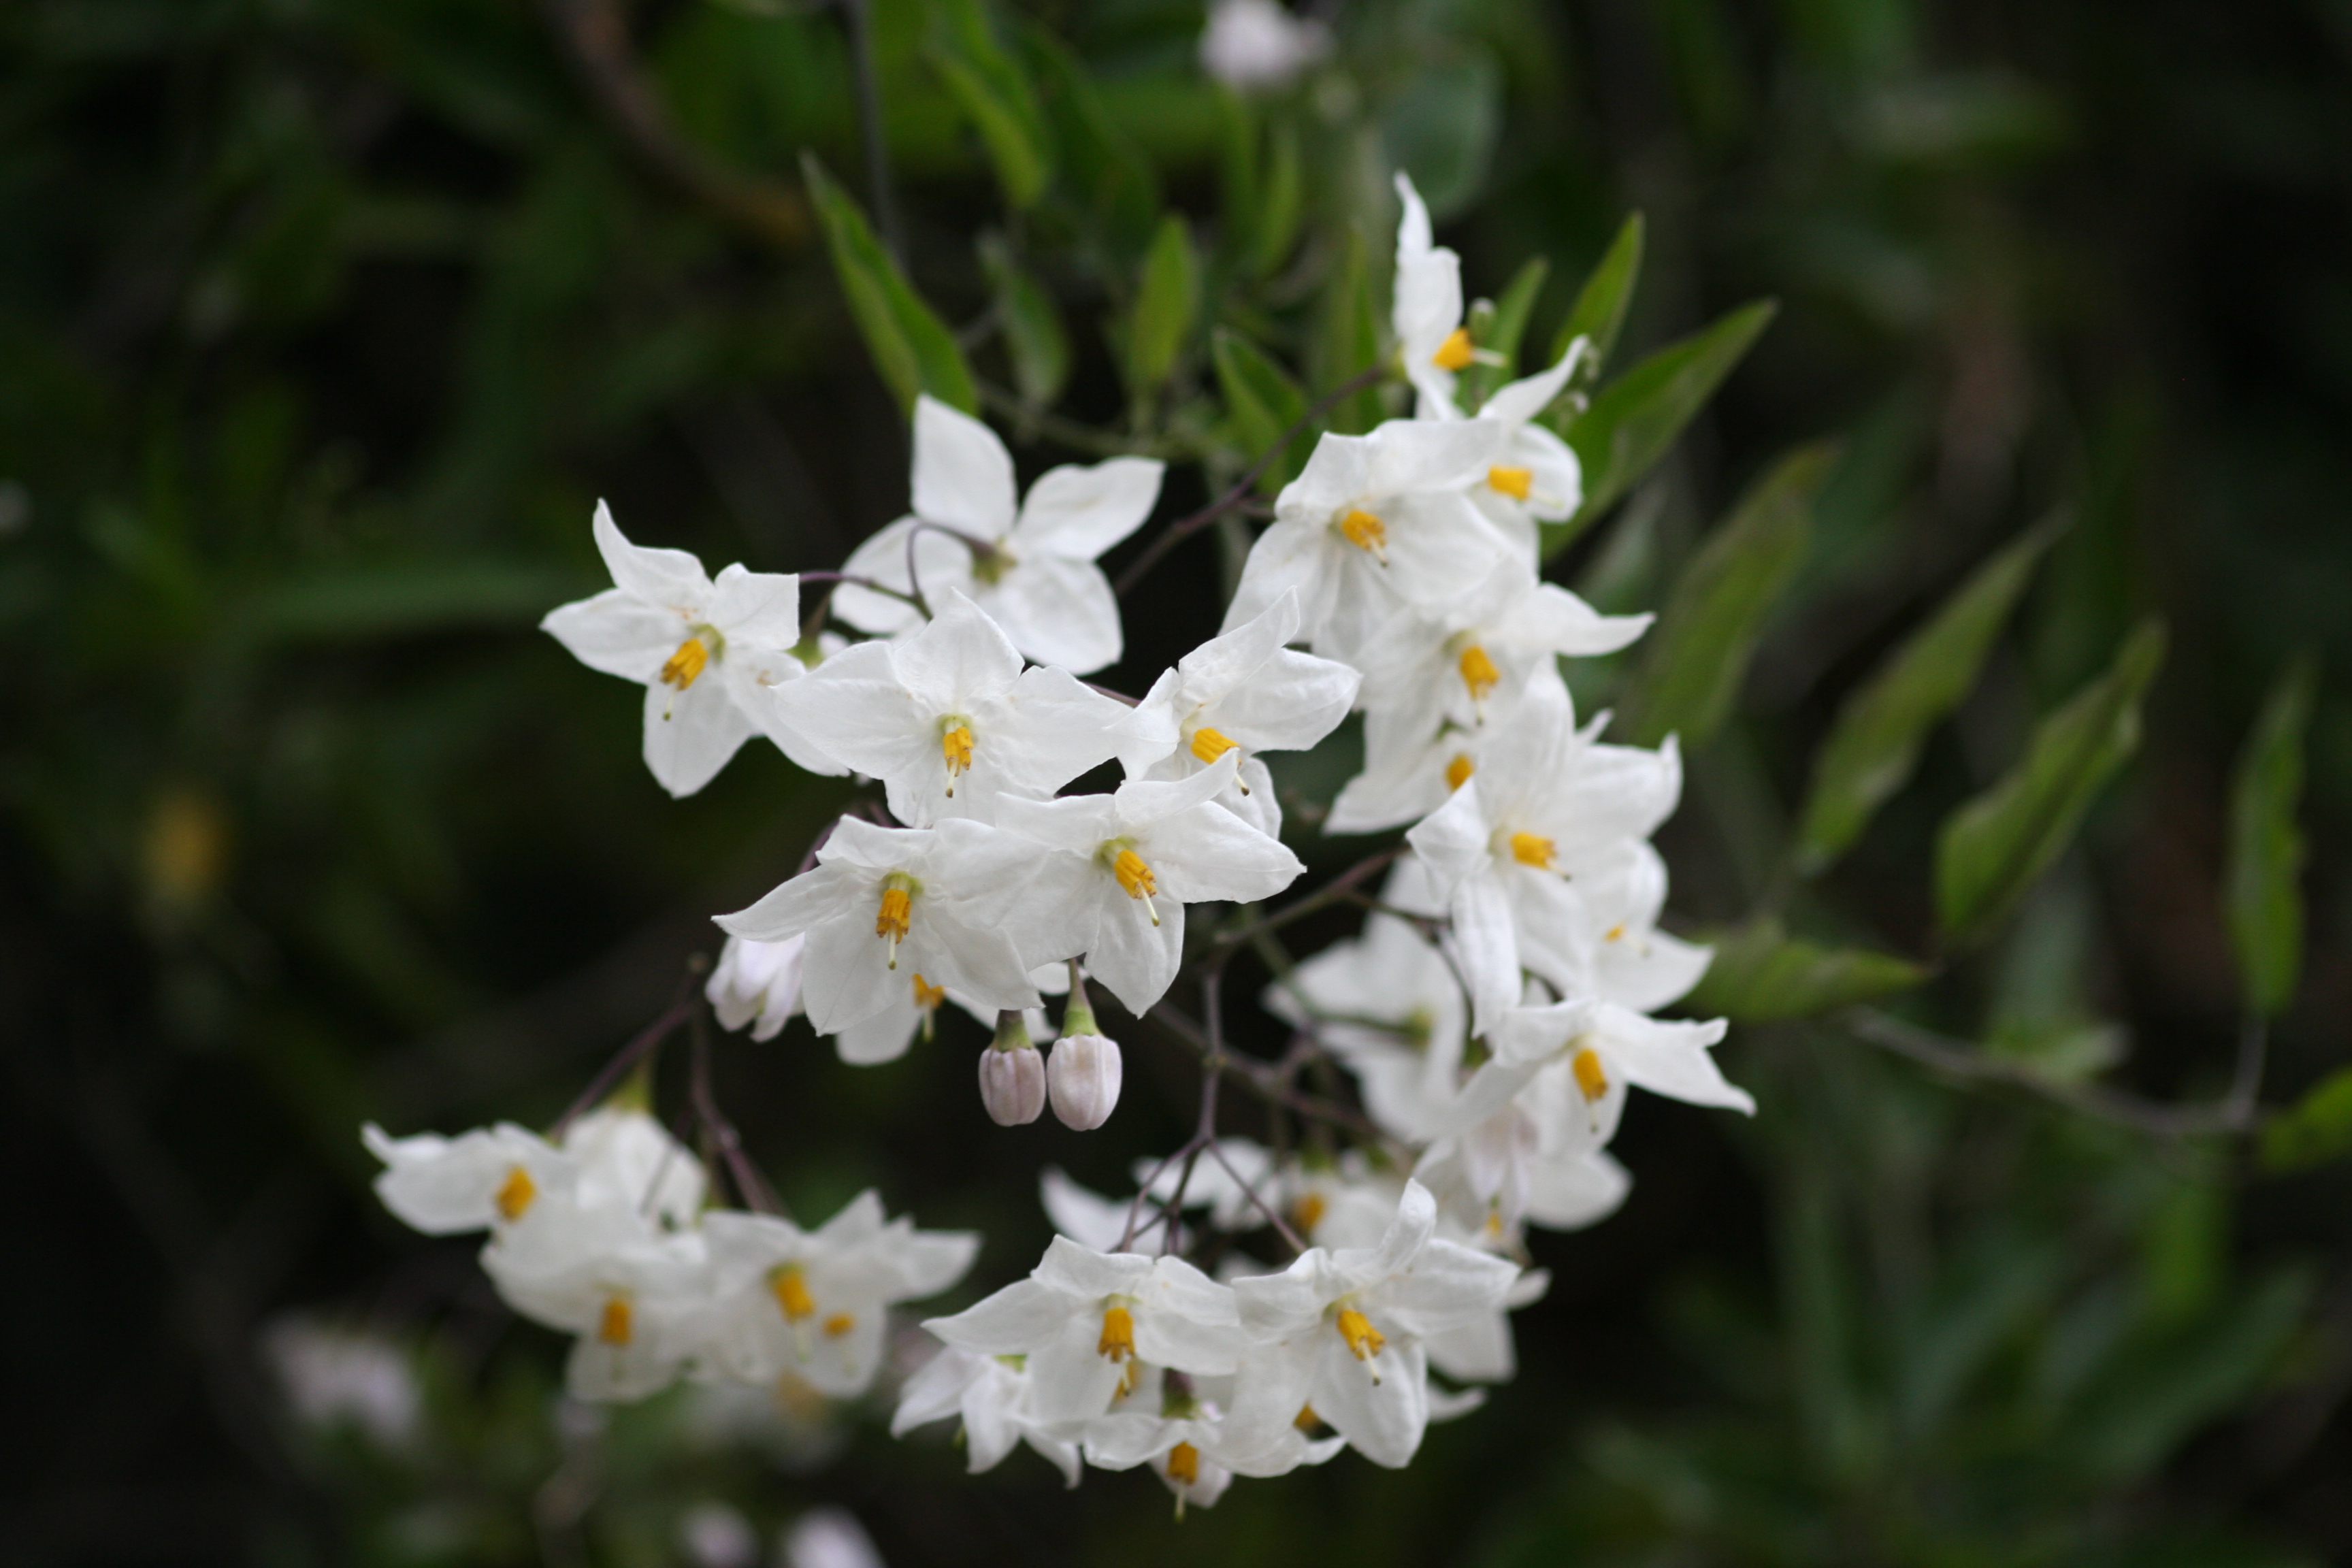 Types Of White Flowers With Pictures And Names ...